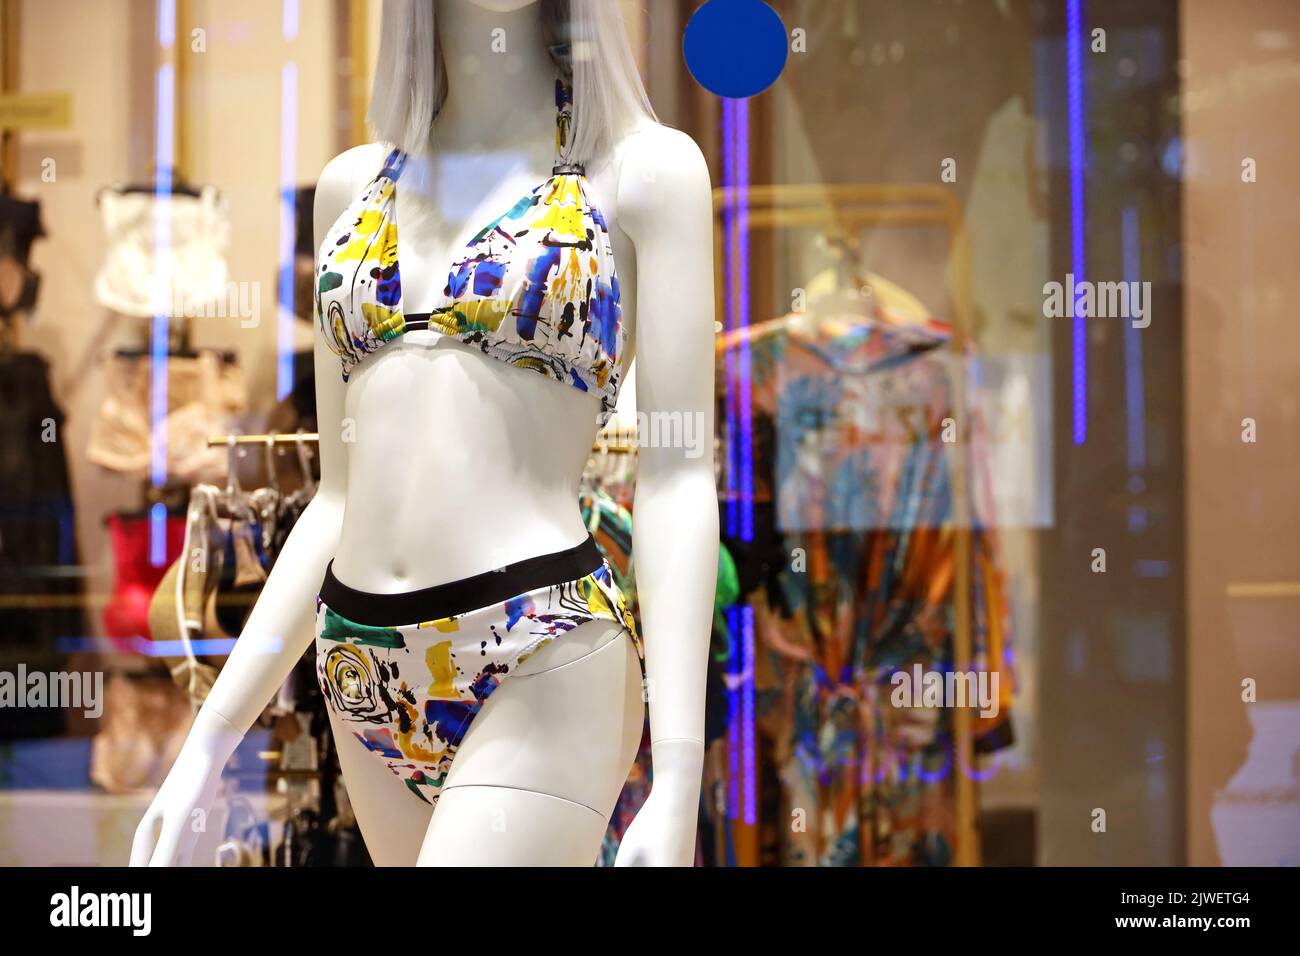 Female mannequin in colorful swimsuit. Lingerie store, swimwear for beach holidays, view through the glass Stock Photo